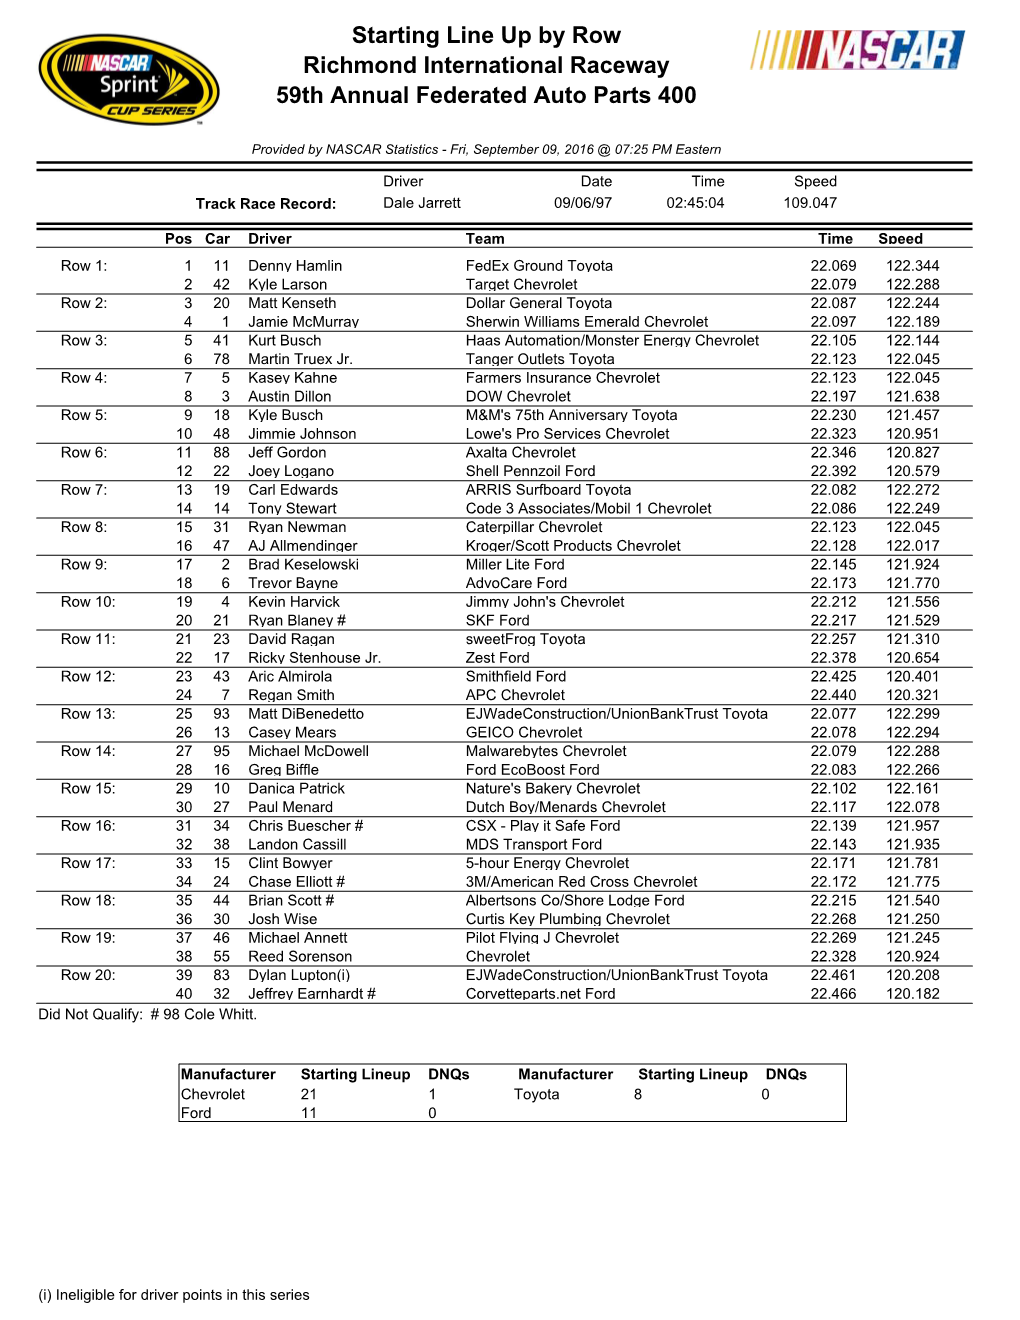 Starting Line up by Row Richmond International Raceway 59Th Annual Federated Auto Parts 400